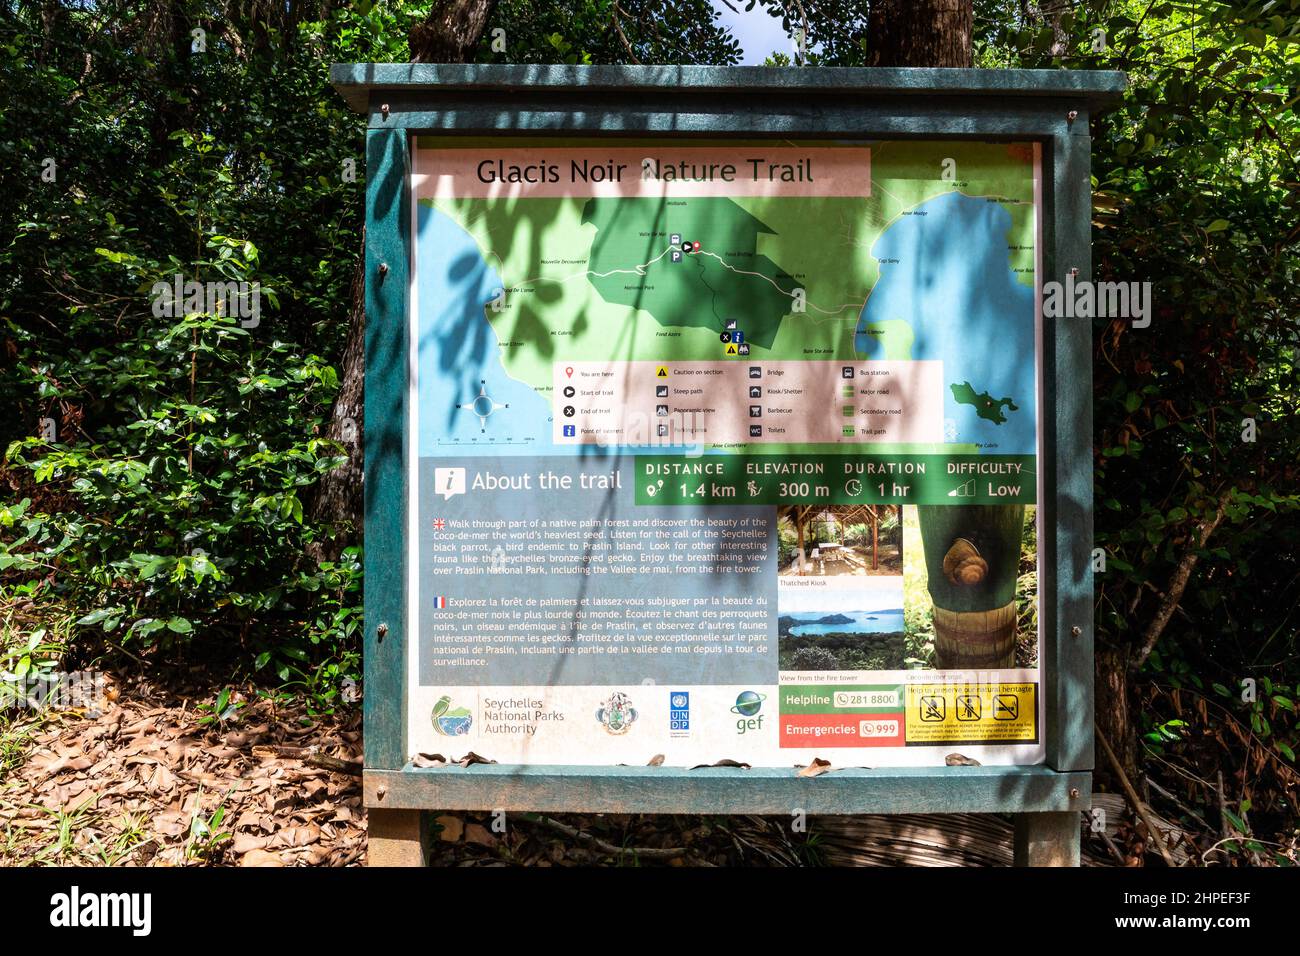 Praslin, Seychelles, 01.05.2021. Glacis Noir Nature Trail tourist information board at the start of the trail, leading to Mont Azore, Praslin. Stock Photo